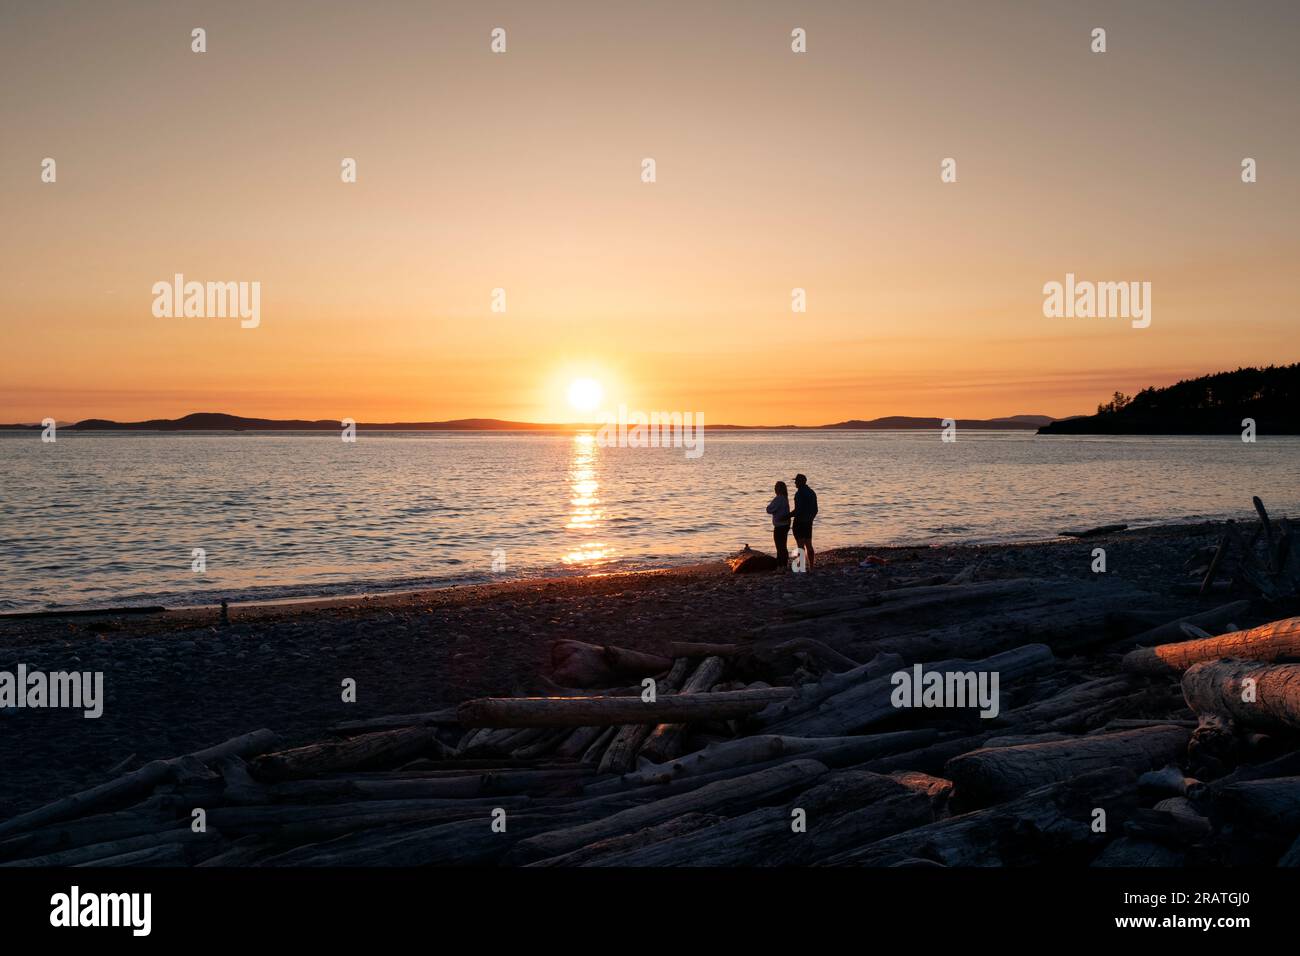 WA24512-00....WASHINGTON - Two people watching the sun set at West Beach in Deception Pass State Park. Stock Photo